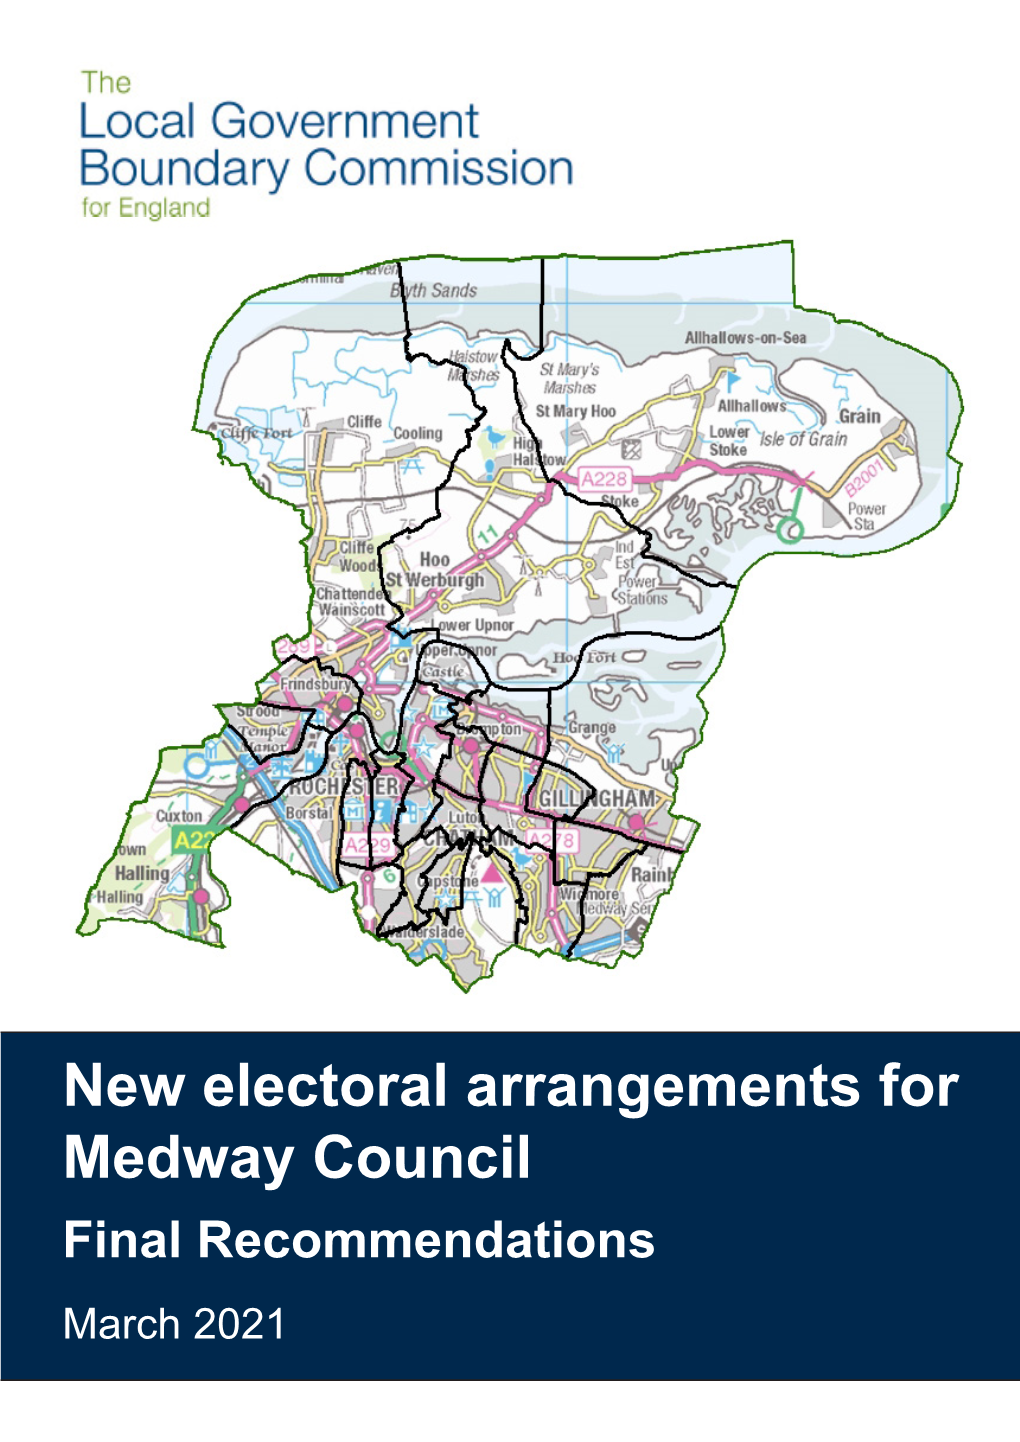 Final Recommendations Report for Medway Council